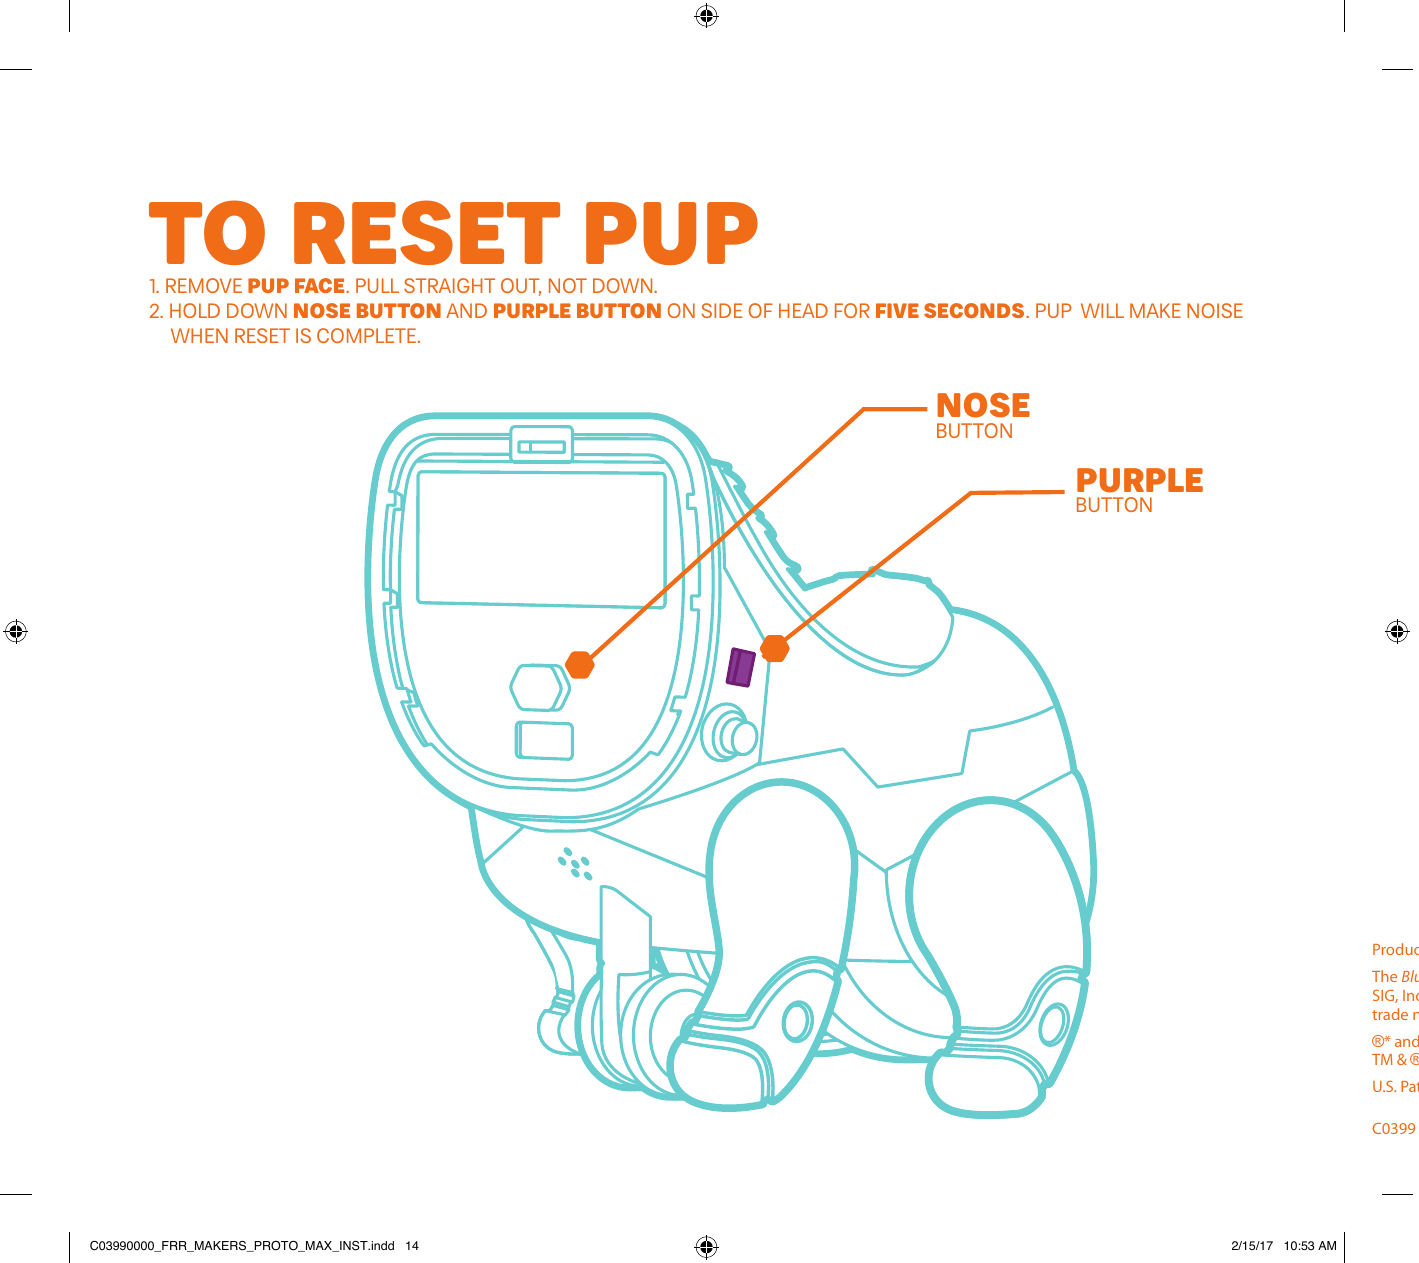 TO RESET PUP1. REMOVE PUP FACE. PULL STRAIGHT OUT, NOT DOWN.2. HOLD DOWN NOSE BUTTON AND PURPLE BUTTON ON SIDE OF HEAD FOR FIVE SECONDS. PUP  WILL MAKE NOISE      WHEN RESET IS COMPLETE. NOSEBUTTONPURPLEBUTTONSURFACE CLEAN ONLYGENTLY WIPE WITH CLEAN, DRY CLOTH. DO NOT GET WET. DO NOT USE DETERGENT OR STAIN REMOVERS.HELPFUL TIPS• IF YOUR PUP’S NOT RESPONDING TO THE APP:  •  BE SURE THAT PUP IS POWERED ON. REPLACE BATTERIES IF THERE’S NO POWER.  •  FOLLOW APP INSTRUCTIONS FOR CONNECTING THE PUP TO YOUR DEVICE.   •  MAKE SURE THAT PUP IS WITHIN 10 FEET OF DEVICE AND NOT CONNECTED TO ANOTHER ONE. IF IT IS, DISCONNECT.   •  ALLOW THE APP TO TURN ON Bluetooth® IF PROMPTED.•  YOUR PUP DOESN’T LIKE WATER, SO KEEP IT AWAY FROM SINKS, BATHTUBS, POOLS, AND ALL OTHER WET PLACES.•  IF YOUR PUP ISN’T RESPONDING TO INPUTS PROPERLY, IT MAY BE TIME TO CHANGE THE BATTERIES.•  FOR MORE TIPS, GO TO FURREALMAKERS.COMProduct and colors may vary. Please retain this information for future reference.The Bluetooth® word mark and logo are registered trademarks owned by Bluetooth SIG, Inc. and any use of such marks by Hasbro is under license. Other trademarks and trade names are those of their respective owners.®* and/or TM* &amp; © 2016 Hasbro, Pawtucket, RI 02861-1059 USA. All Rights Reserved. TM &amp; ® denote U.S. Trademarks. US/CANADA TEL. 1-800-255-5516.U.S. Pat. Nos.  6773344, 6356867 &amp; 6160986.C0399  PN00014446 C03990000_FRR_MAKERS_PROTO_MAX_INST.indd   14 2/15/17   10:53 AM